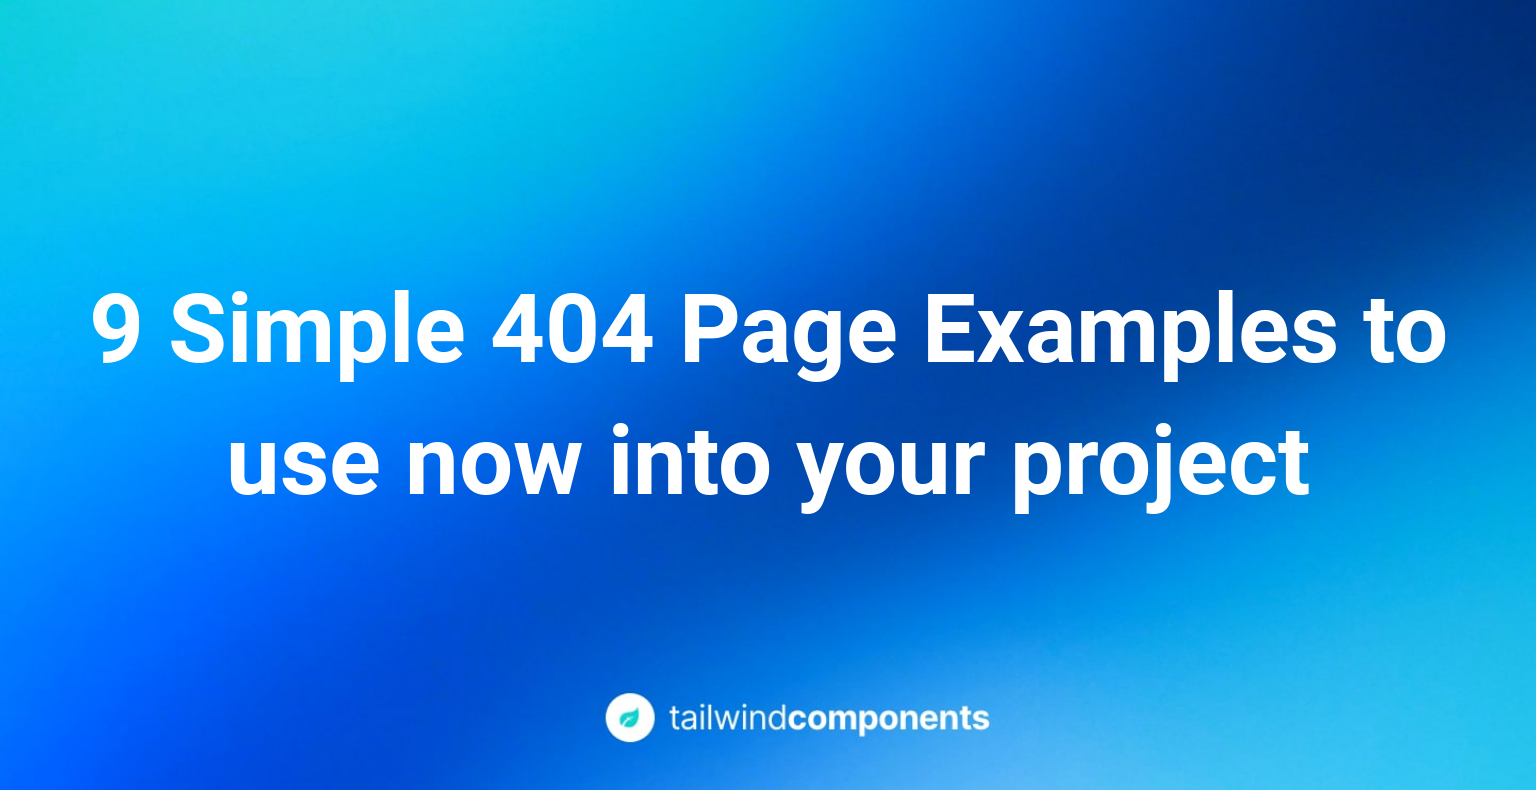 9 Simple 404 Page Examples to use now into your project Image